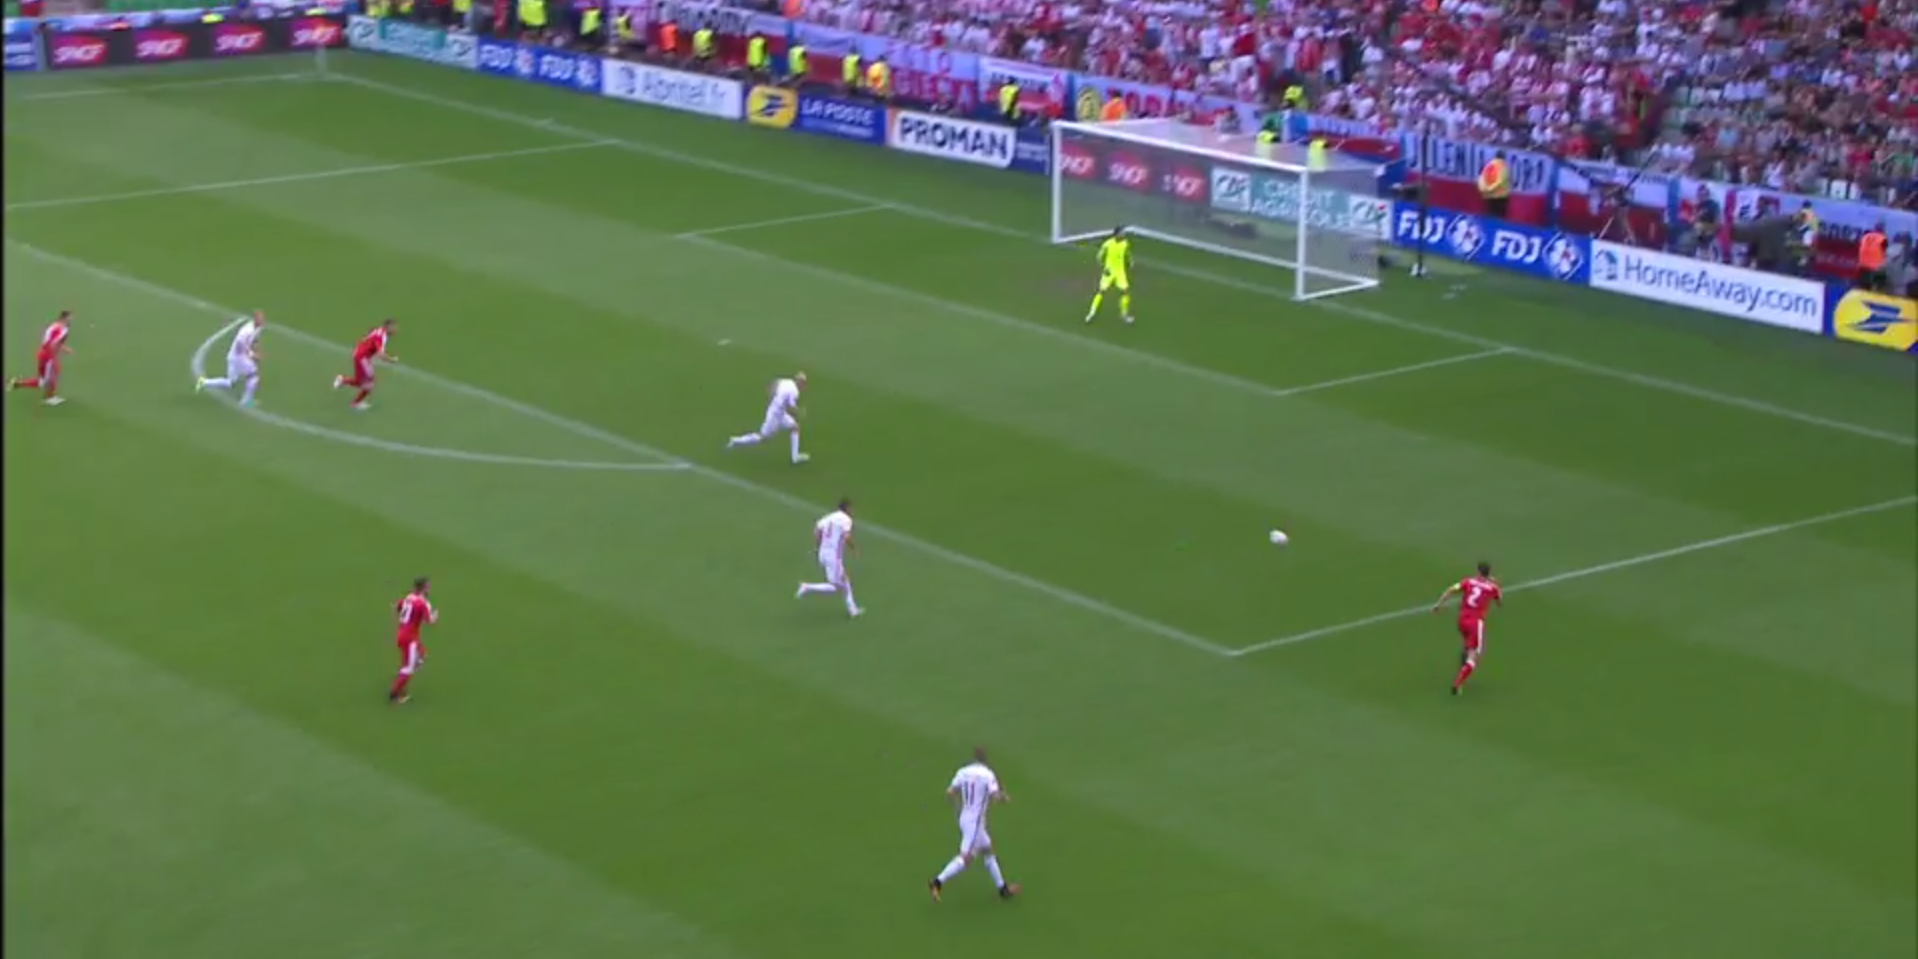 Effective ball over the Polish defence for the Swiss to run on to